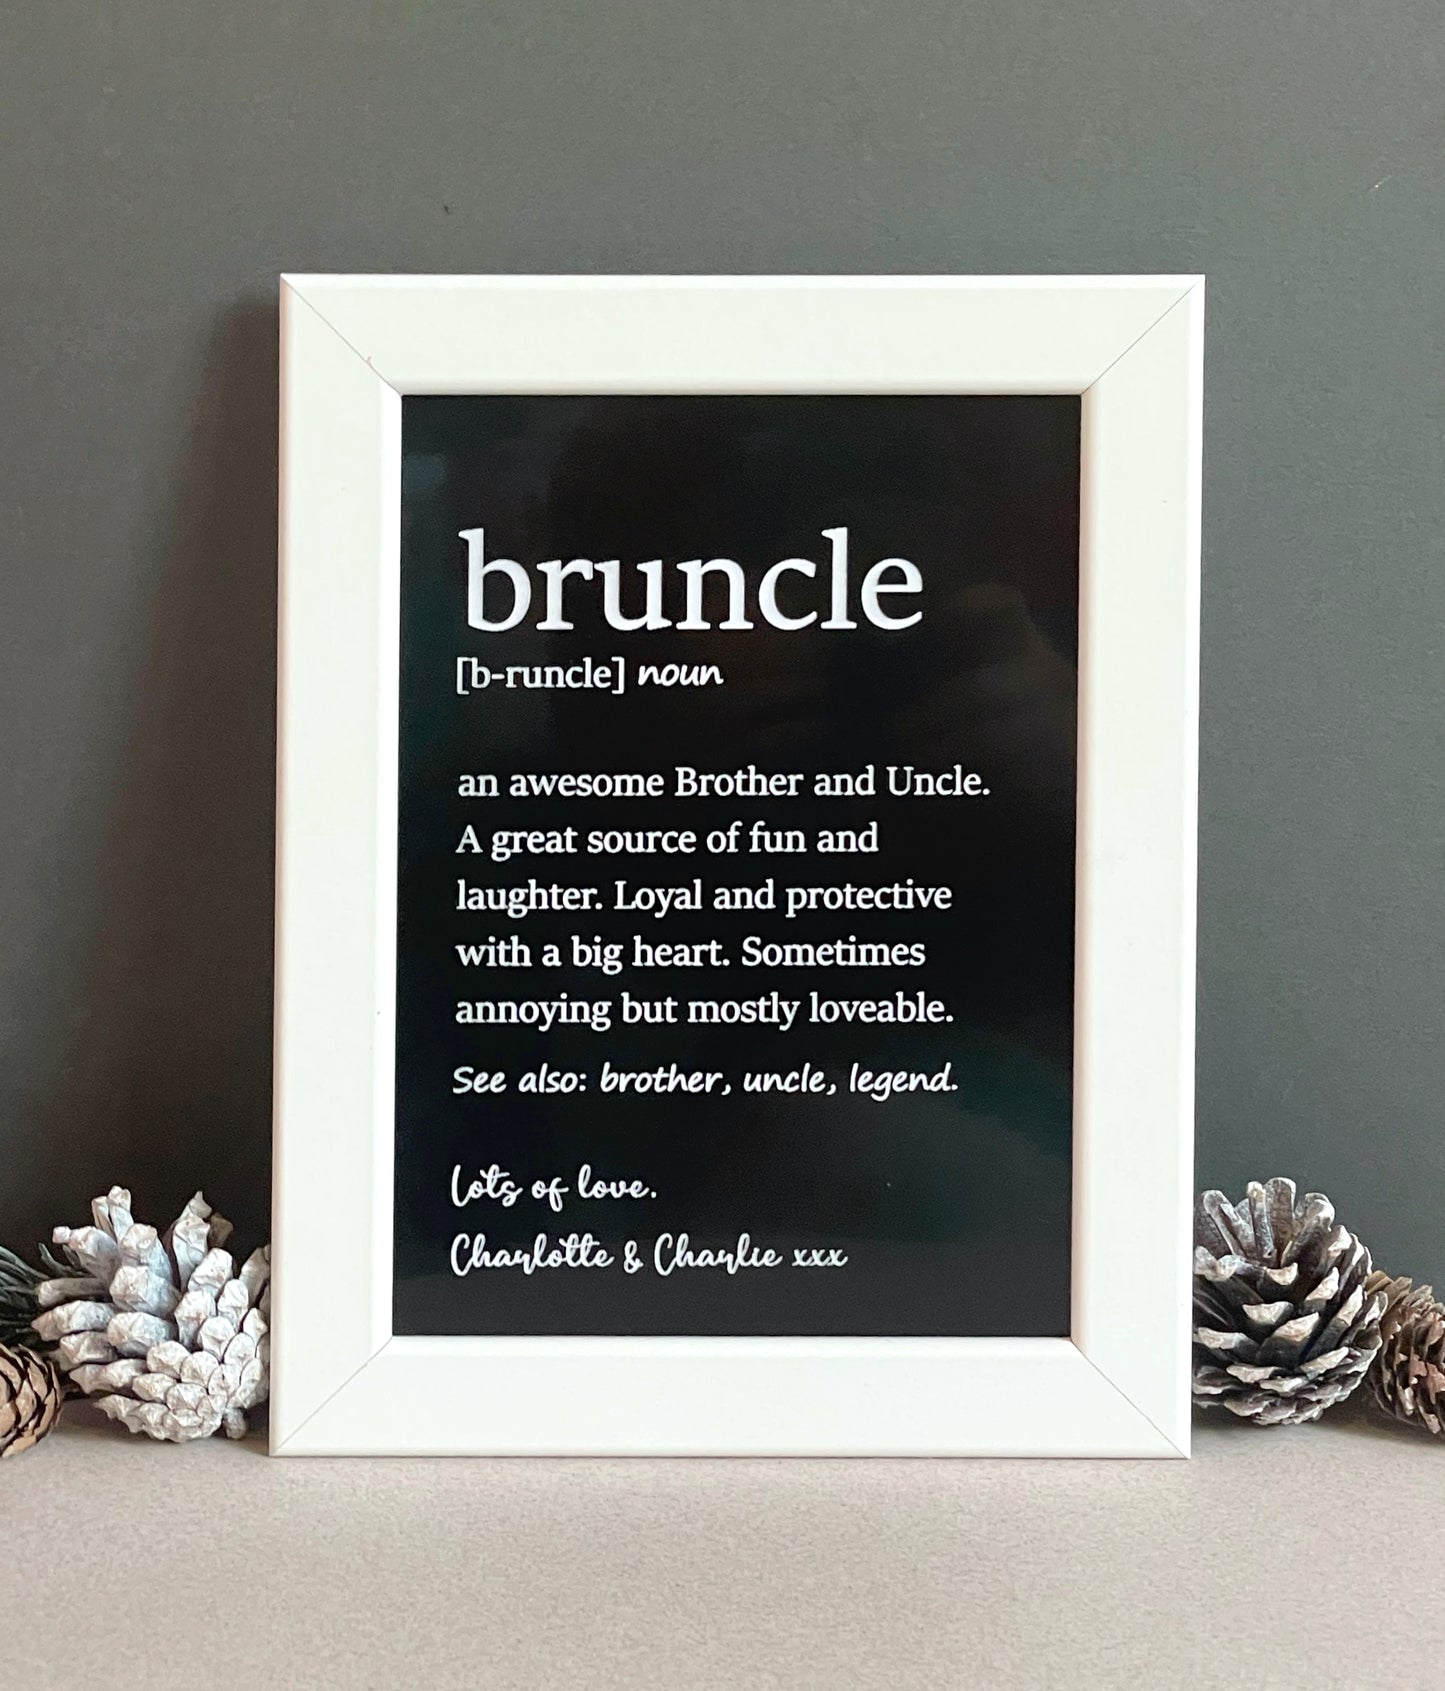 Brother Uncle Definition Engraved Frame Gift | Funny Gift Buncle